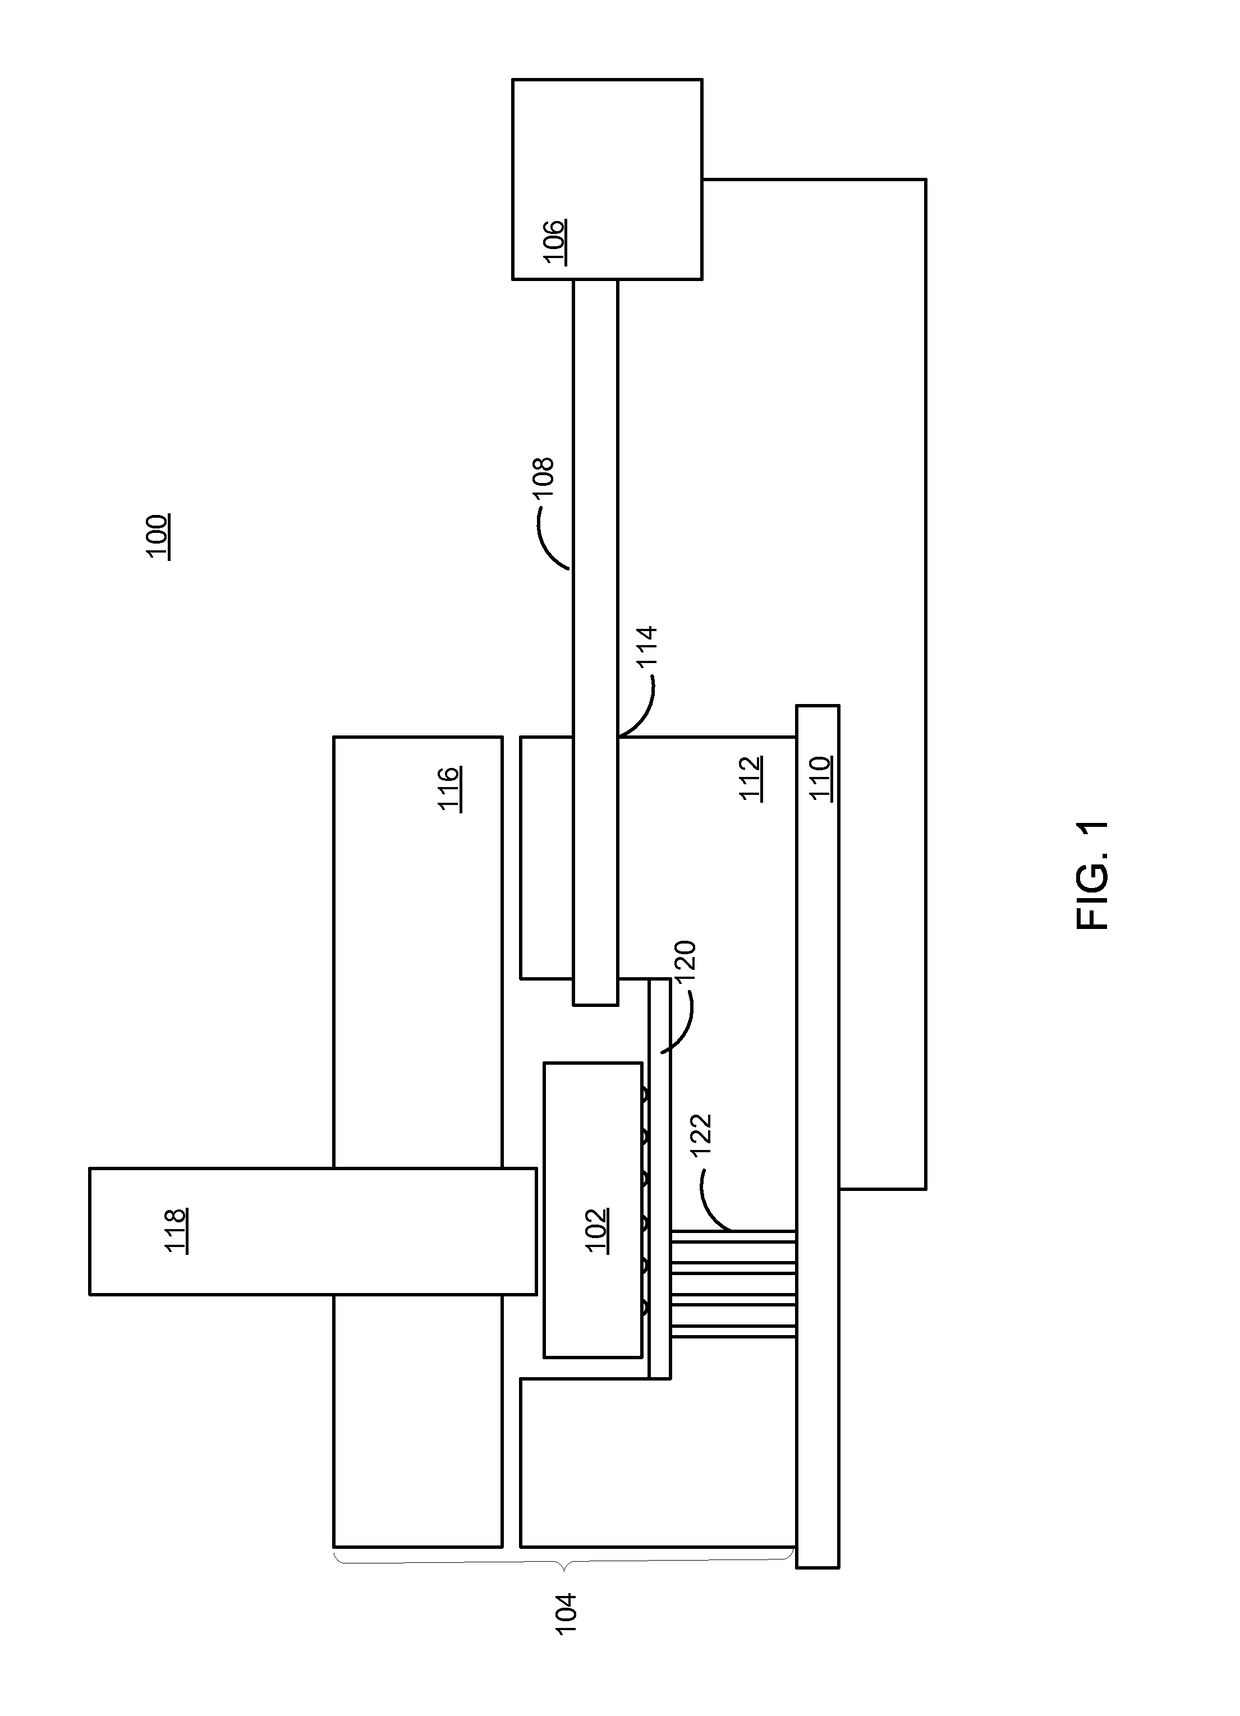 Module test socket for over the air testing of radio frequency integrated circuits